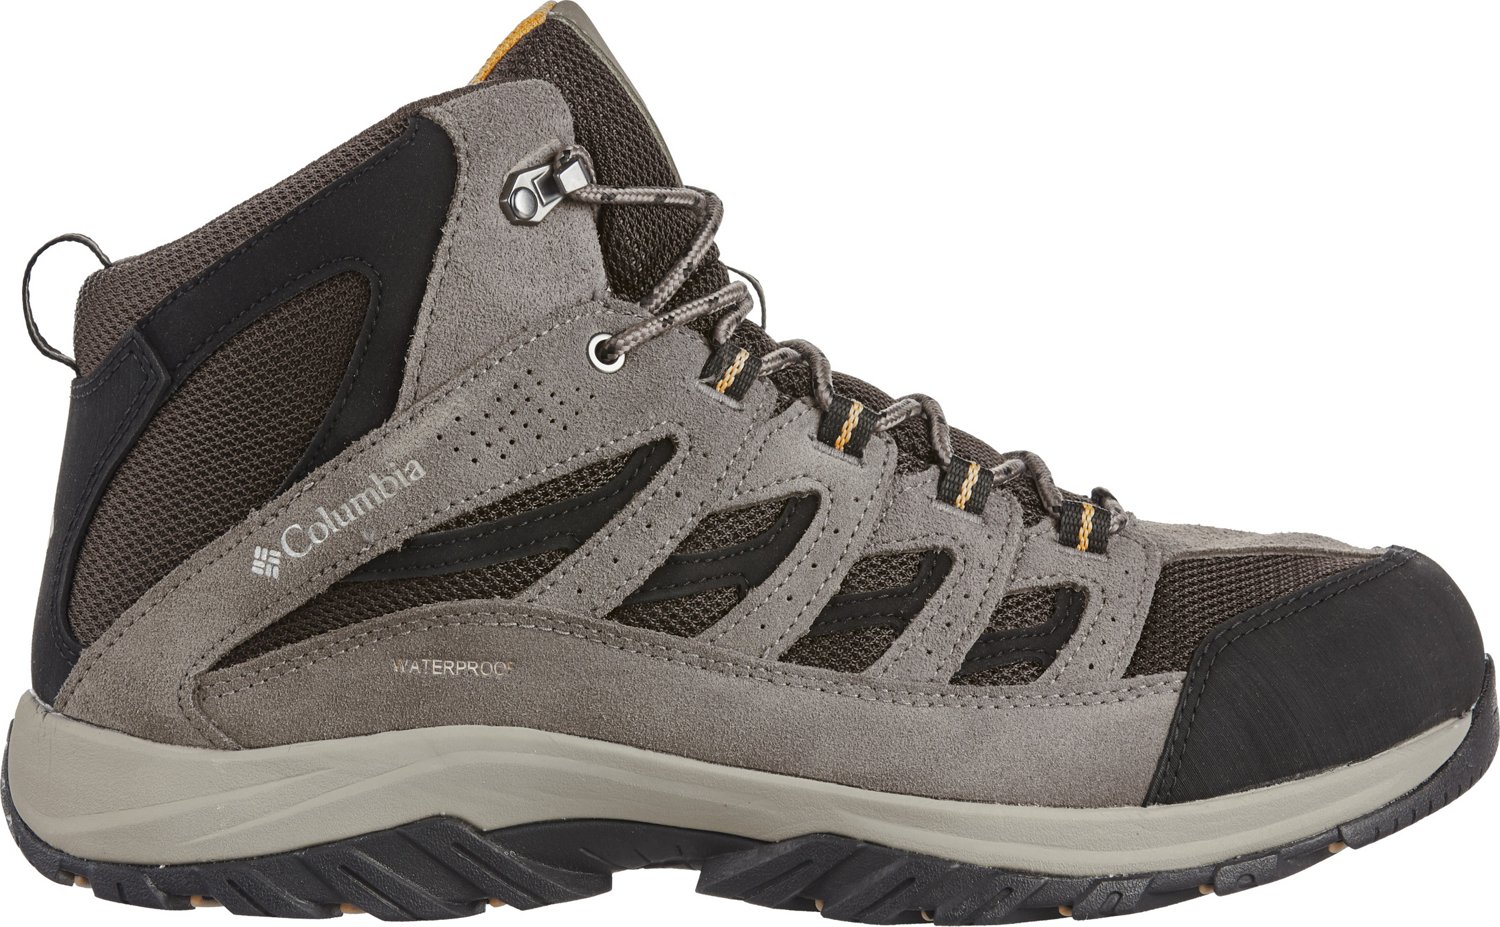 Men's Hiking Boots | Hiking Boots For Men, Waterproof Hiking Boots ...